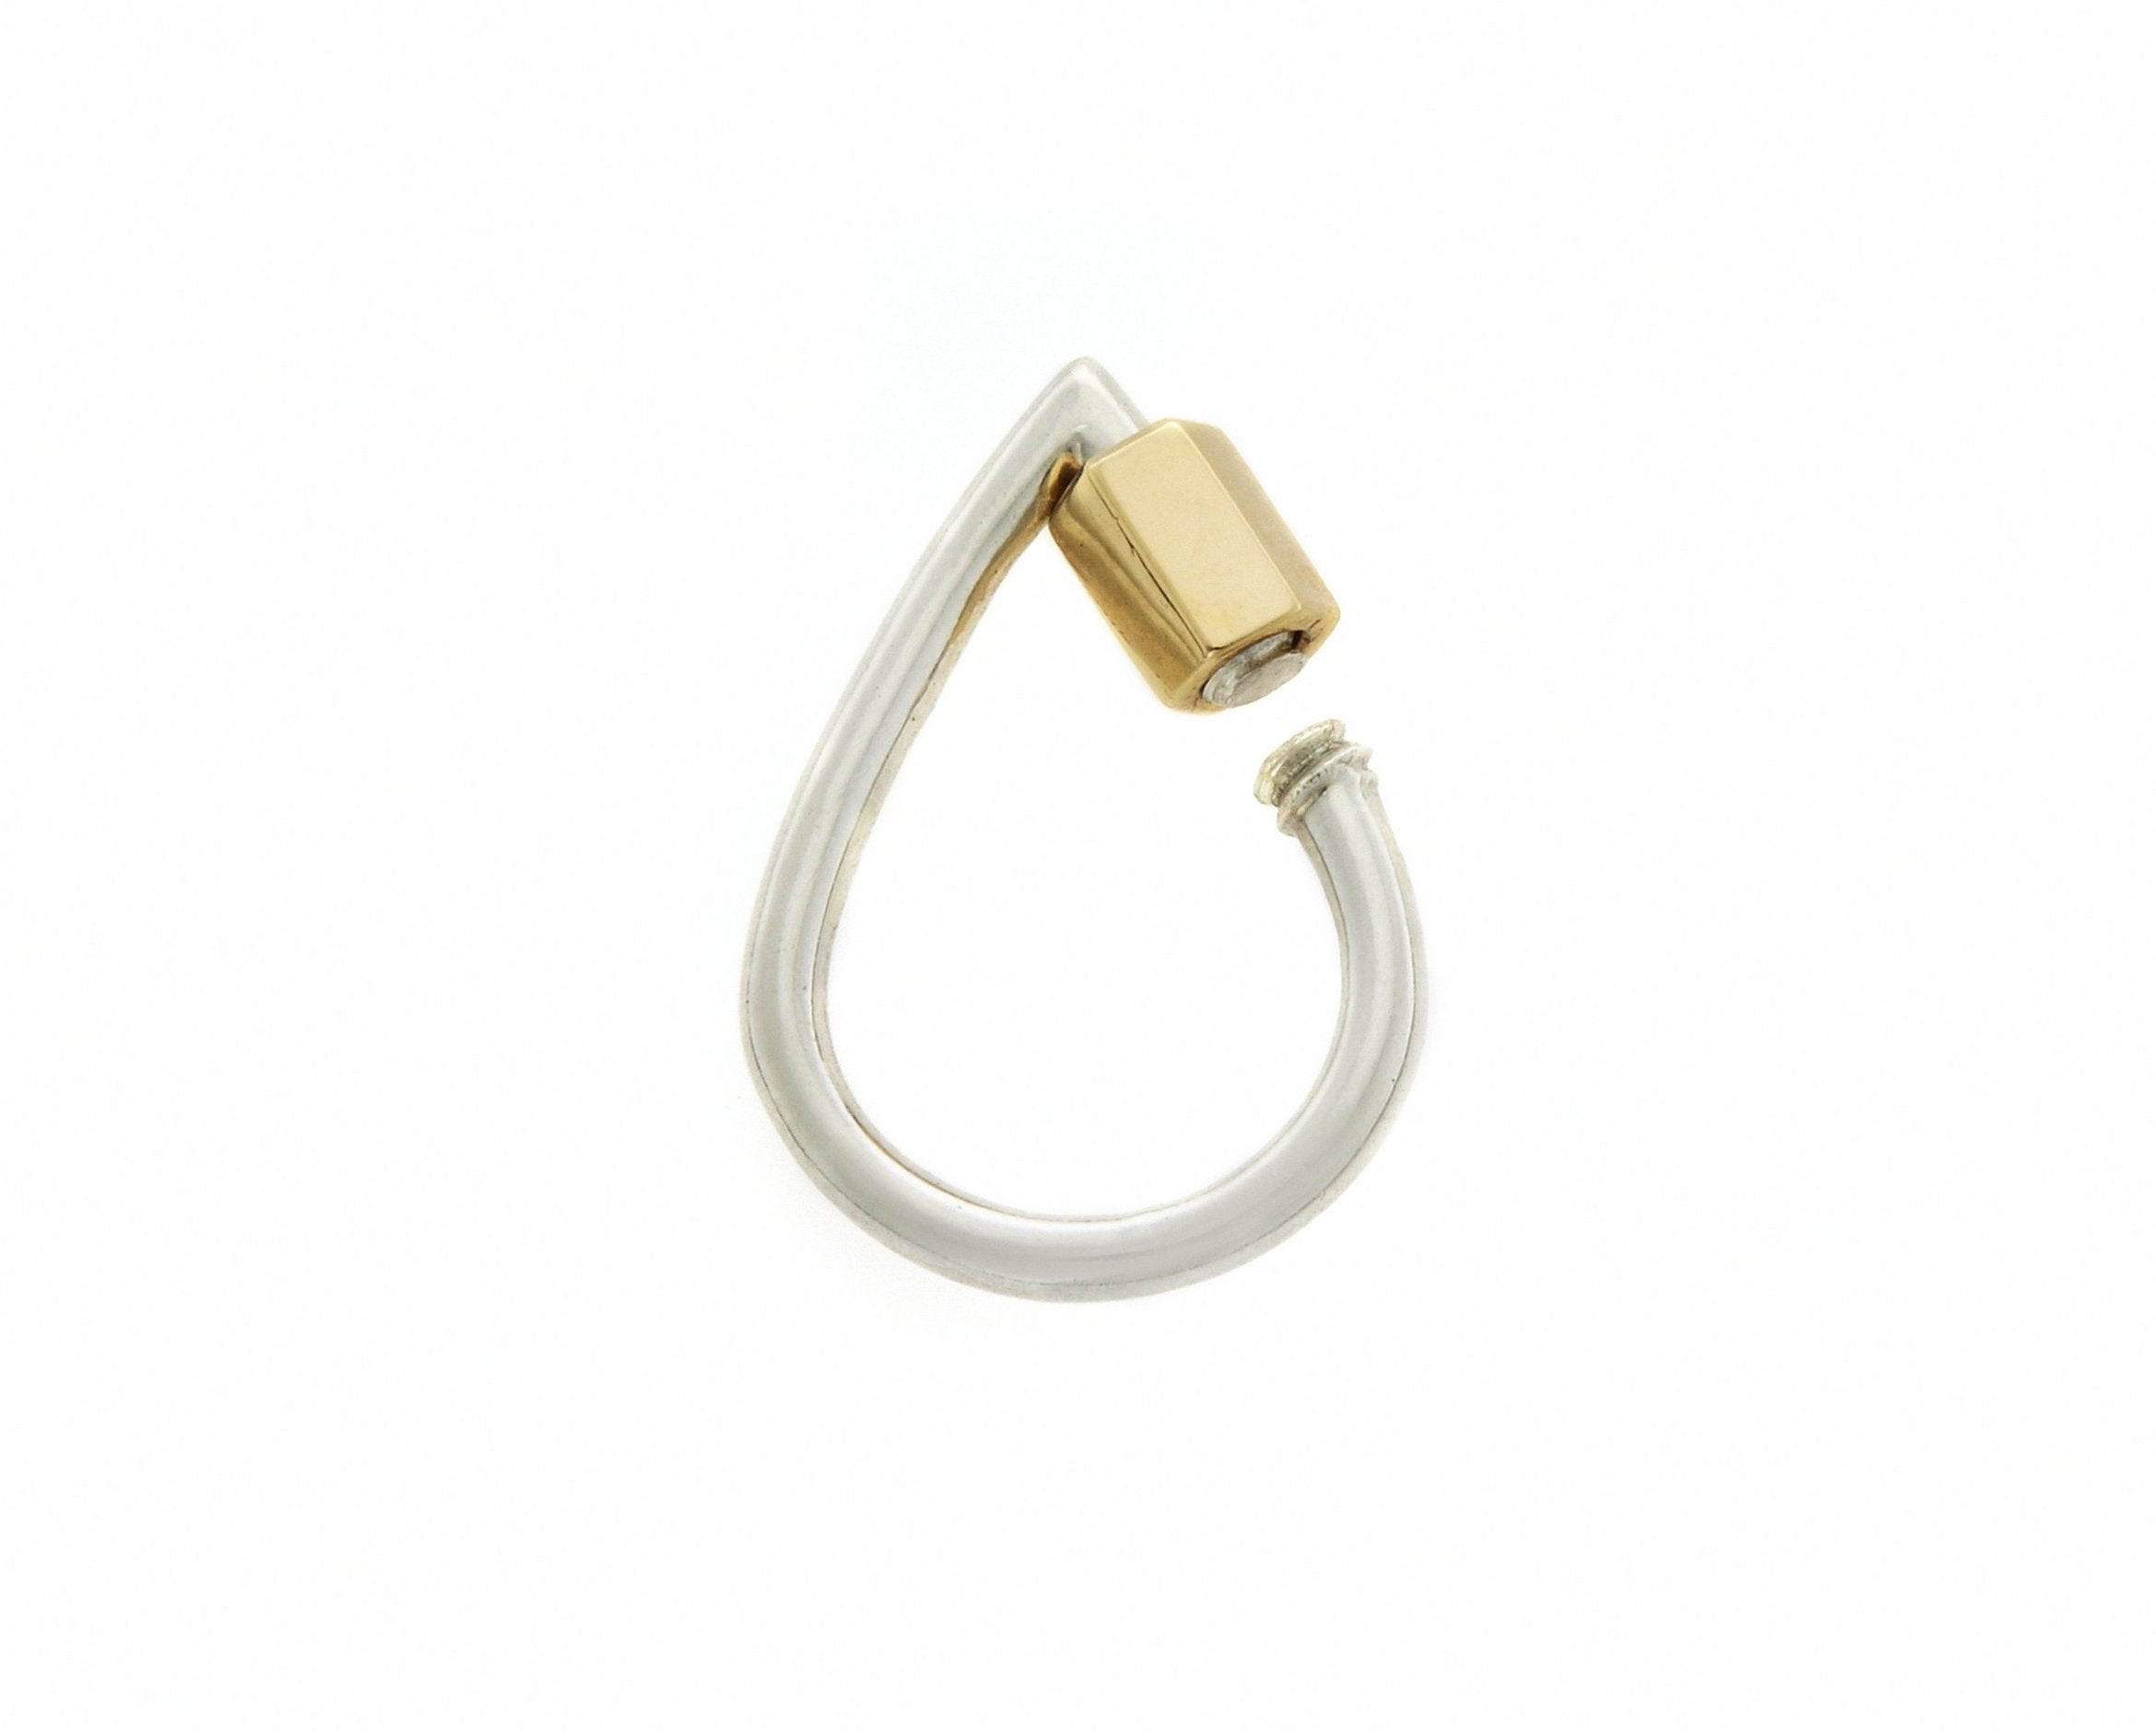 Yellow gold and silver droplock with open clasp